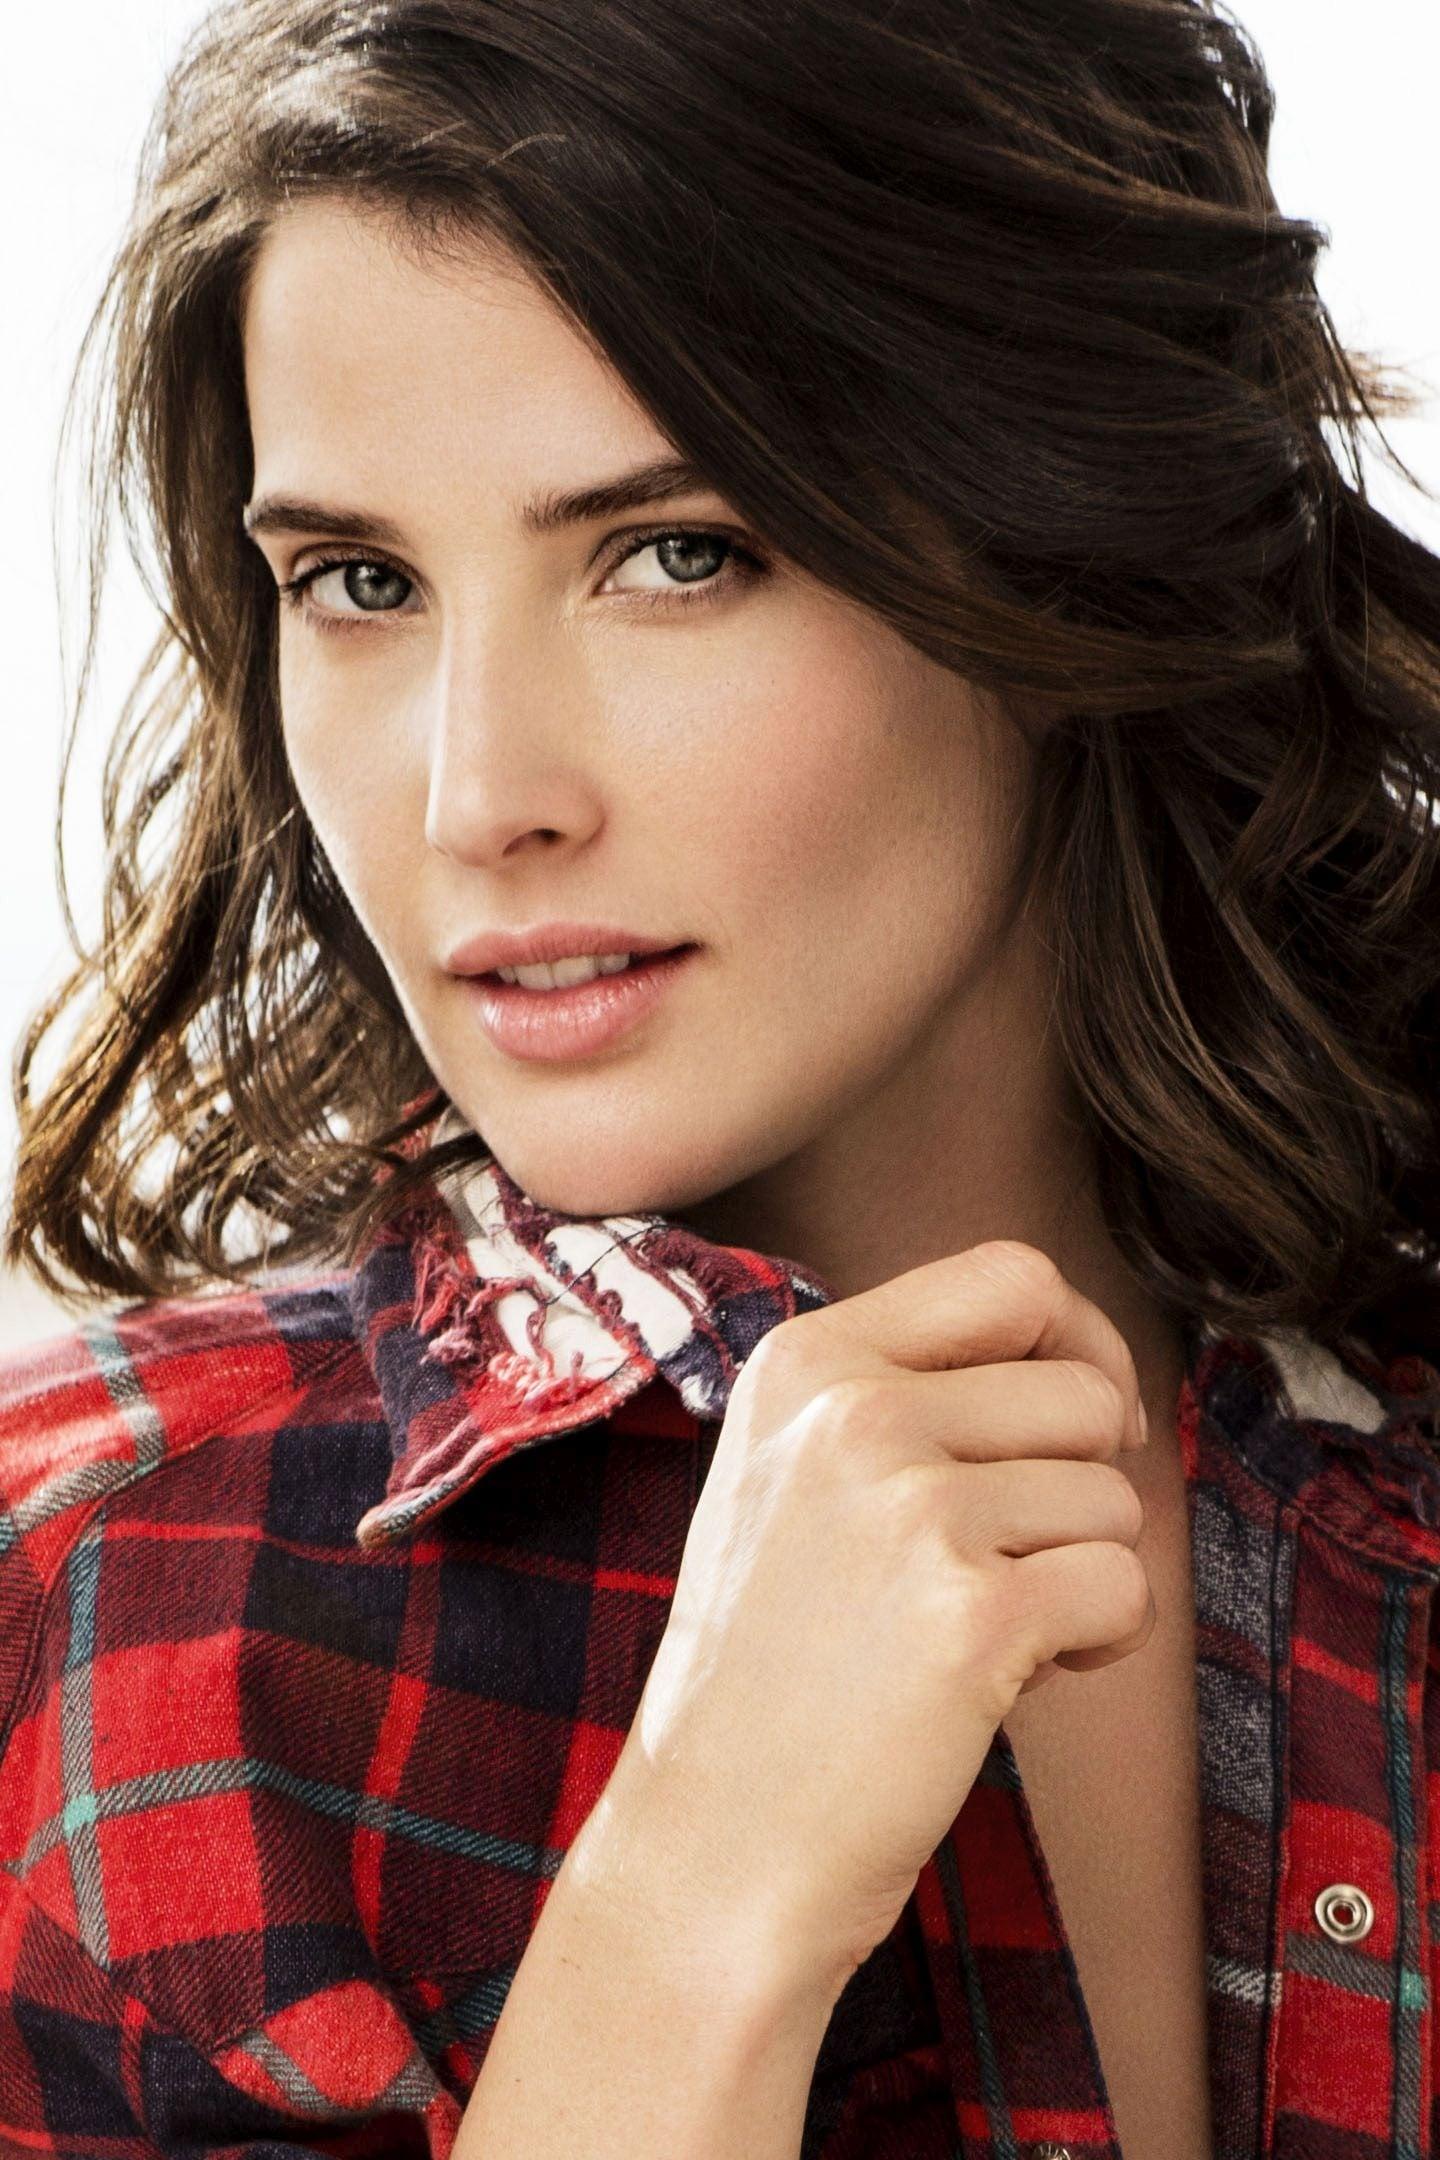 70+ Hot Pictures Of Cobie Smulders – Maria Hill Actress In Marvel Movies 284